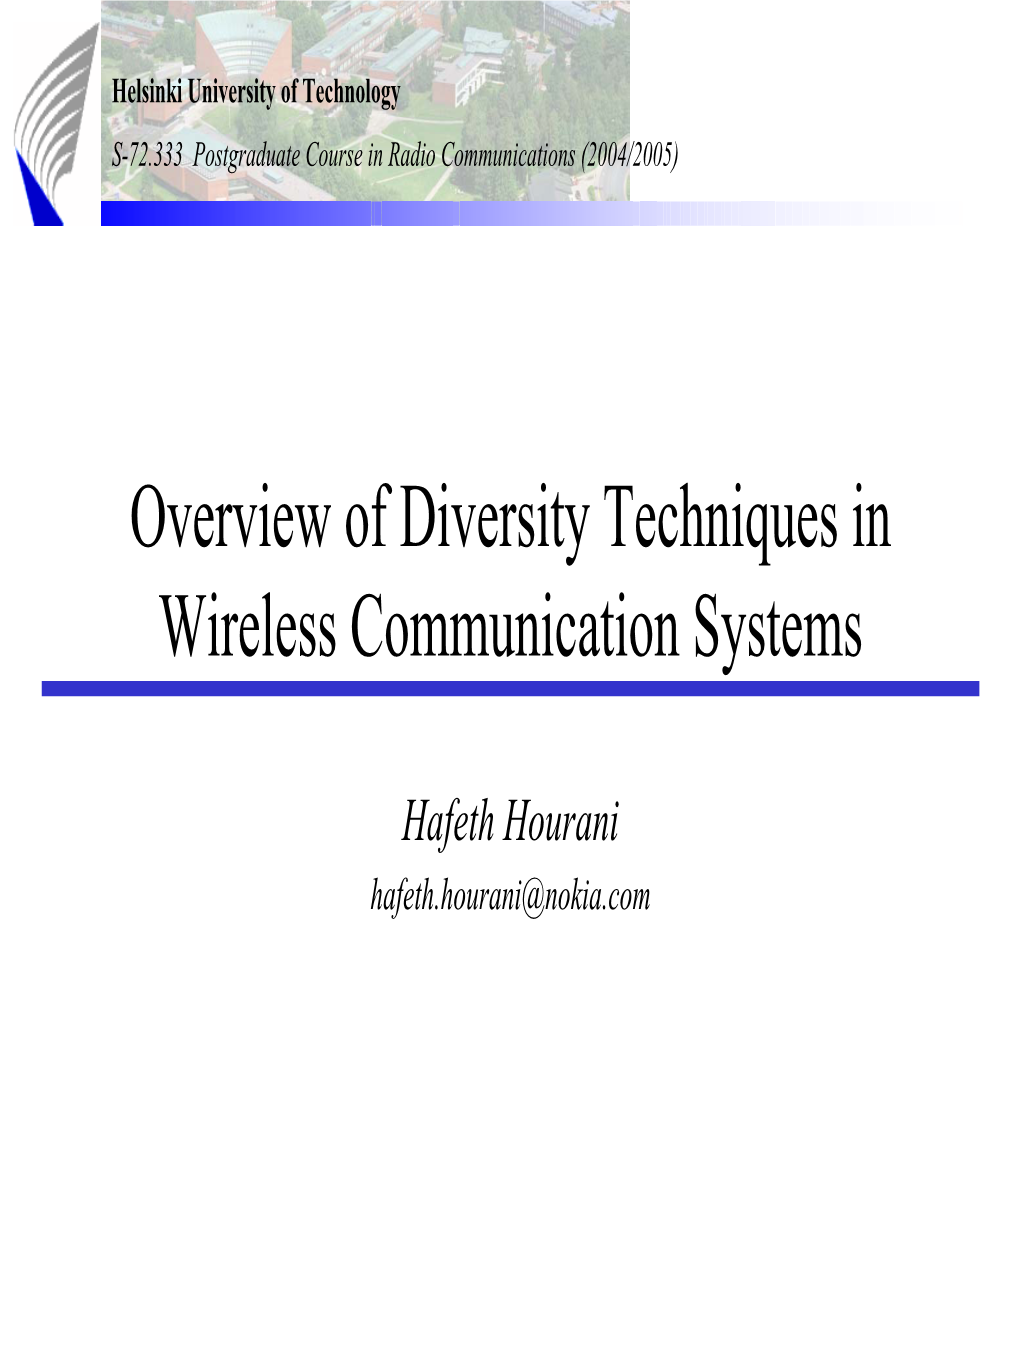 Overview of Diversity Techniques in Wireless Communication Systems